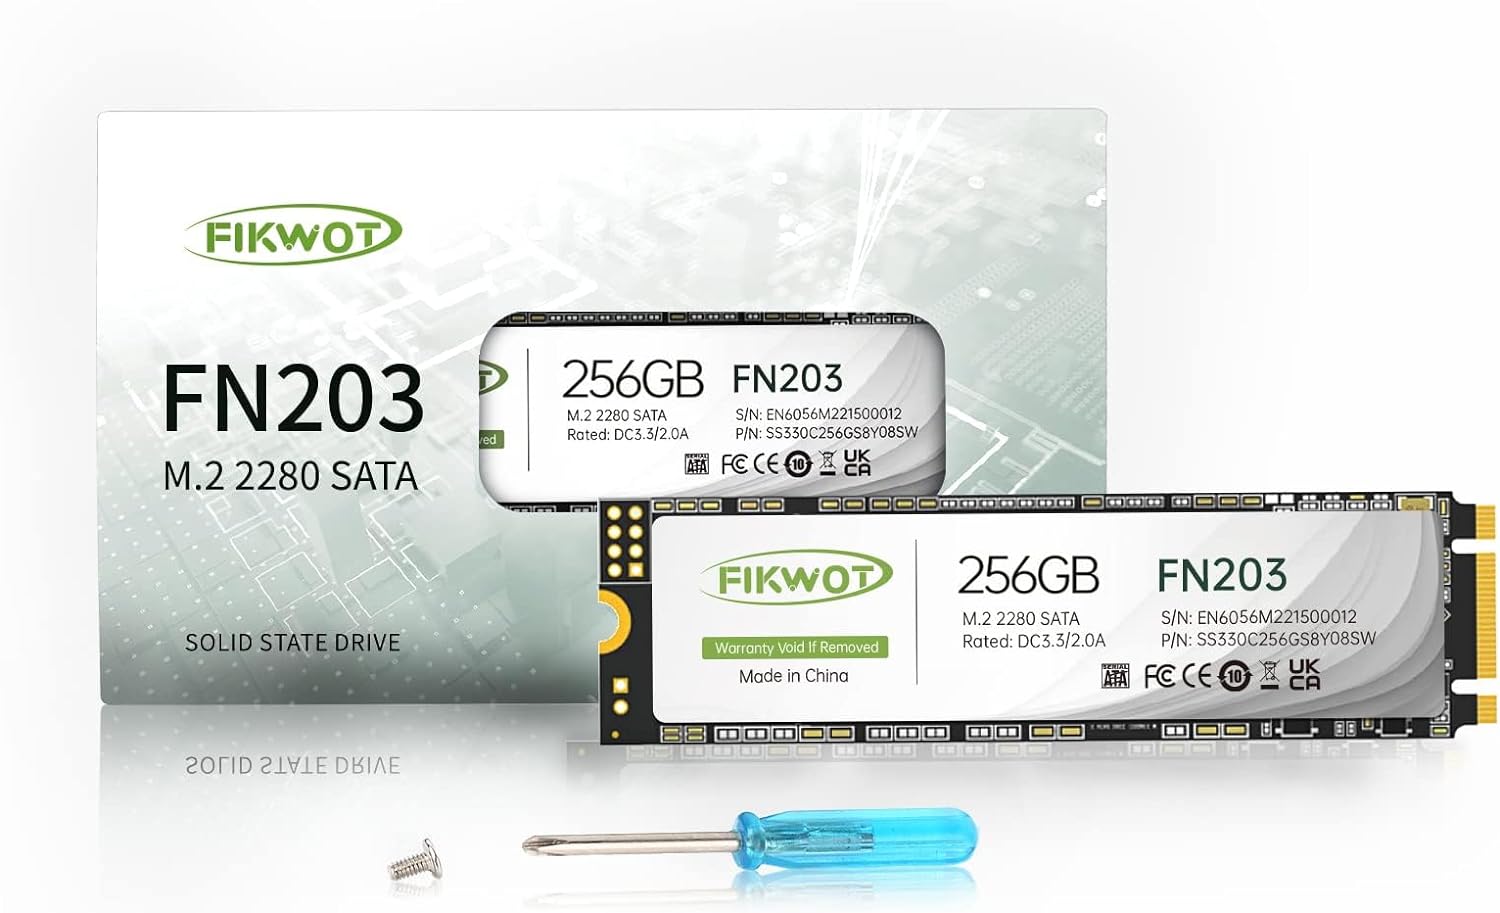 FS810 1TB SSD SATA III 2.5 6GB/s, Internal Solid State Drive 3D NAND Flash (Read/Write Speed up to 550/500 MB/s) Compatible with Laptop  PC Desktop